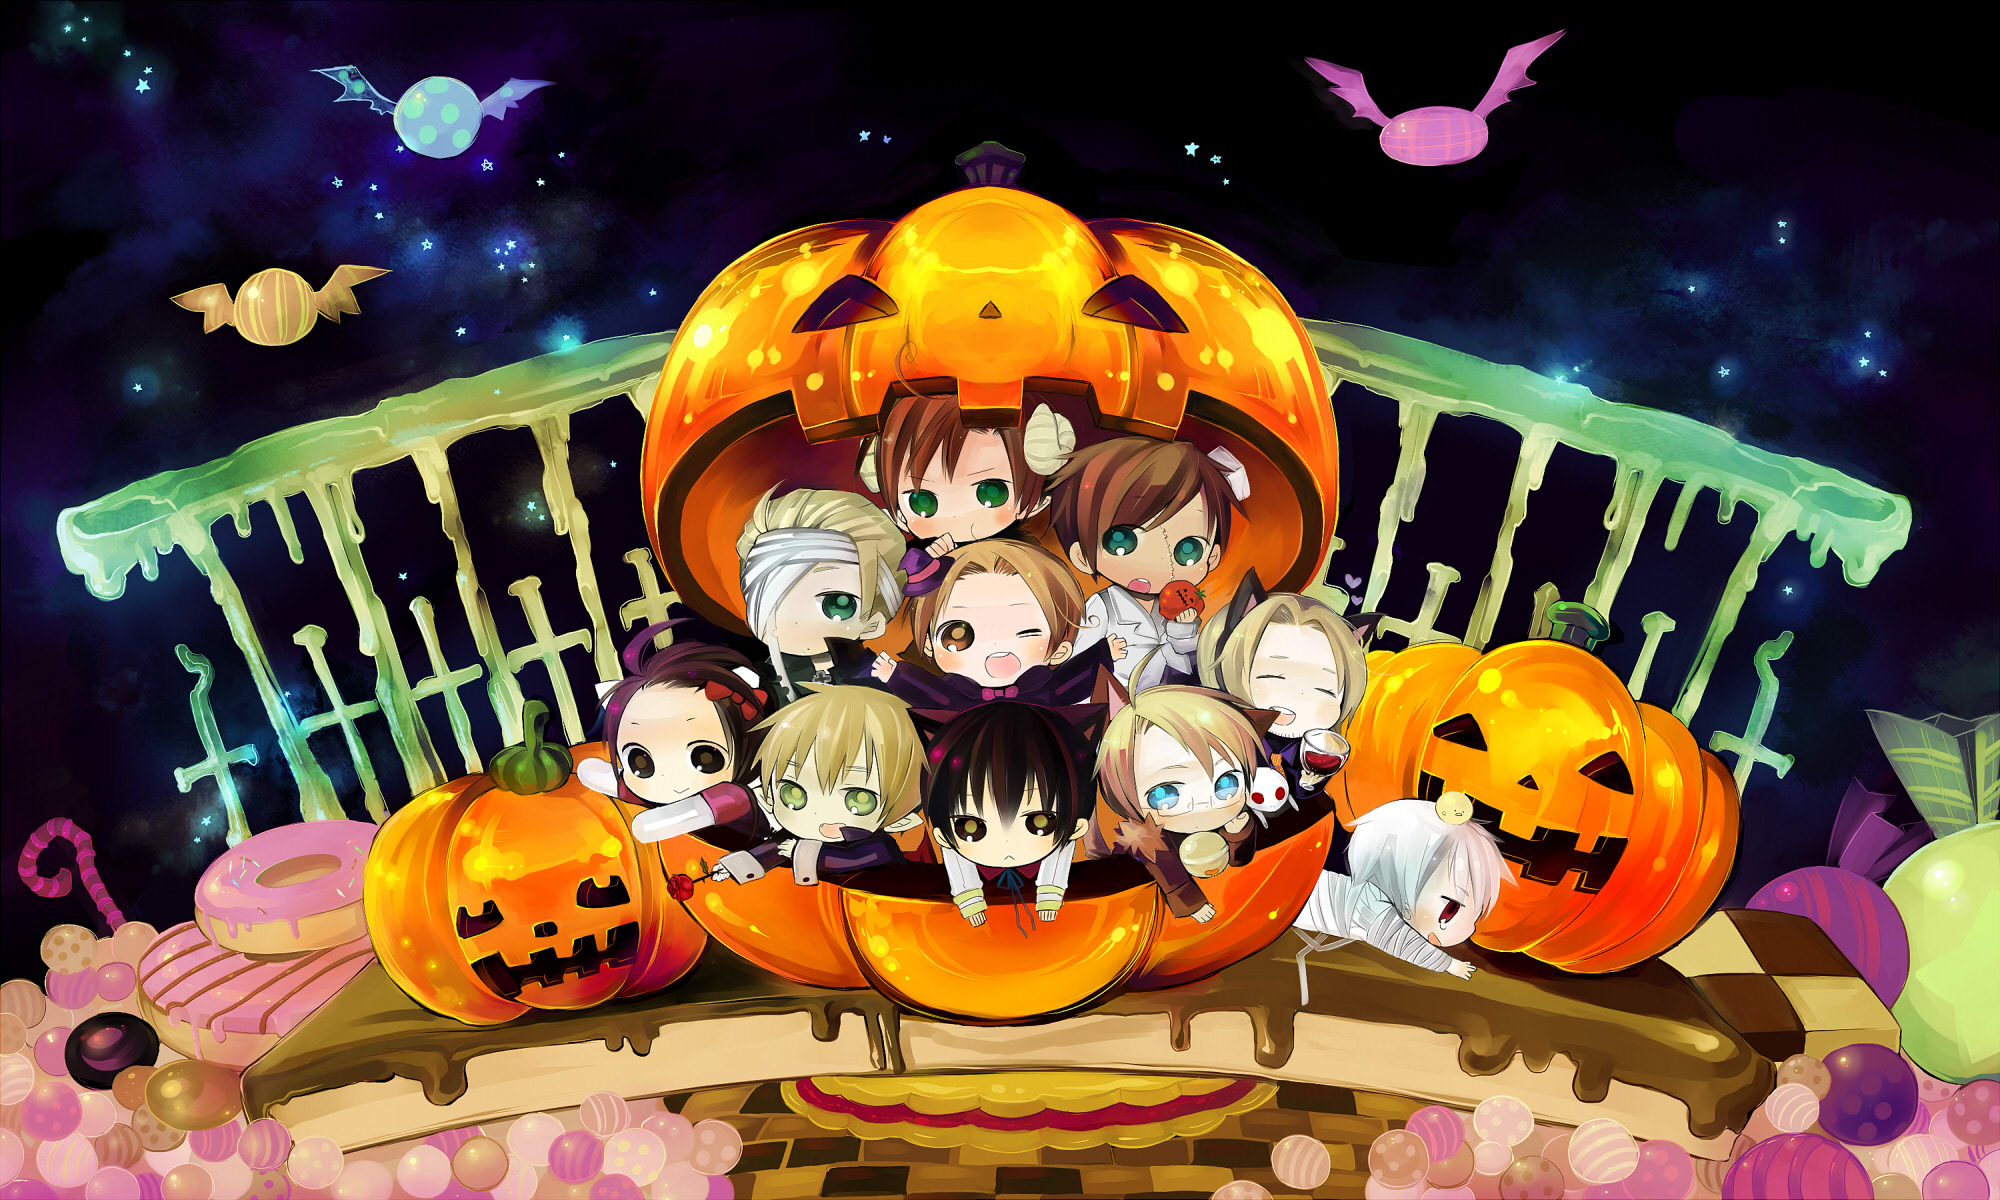 japan, England, China, Germany, Halloween, France, Chibi, Usa, Italy, Anime, Prussia, Axis, Powers, Hetalia Wallpaper HD / Desktop and Mobile Background